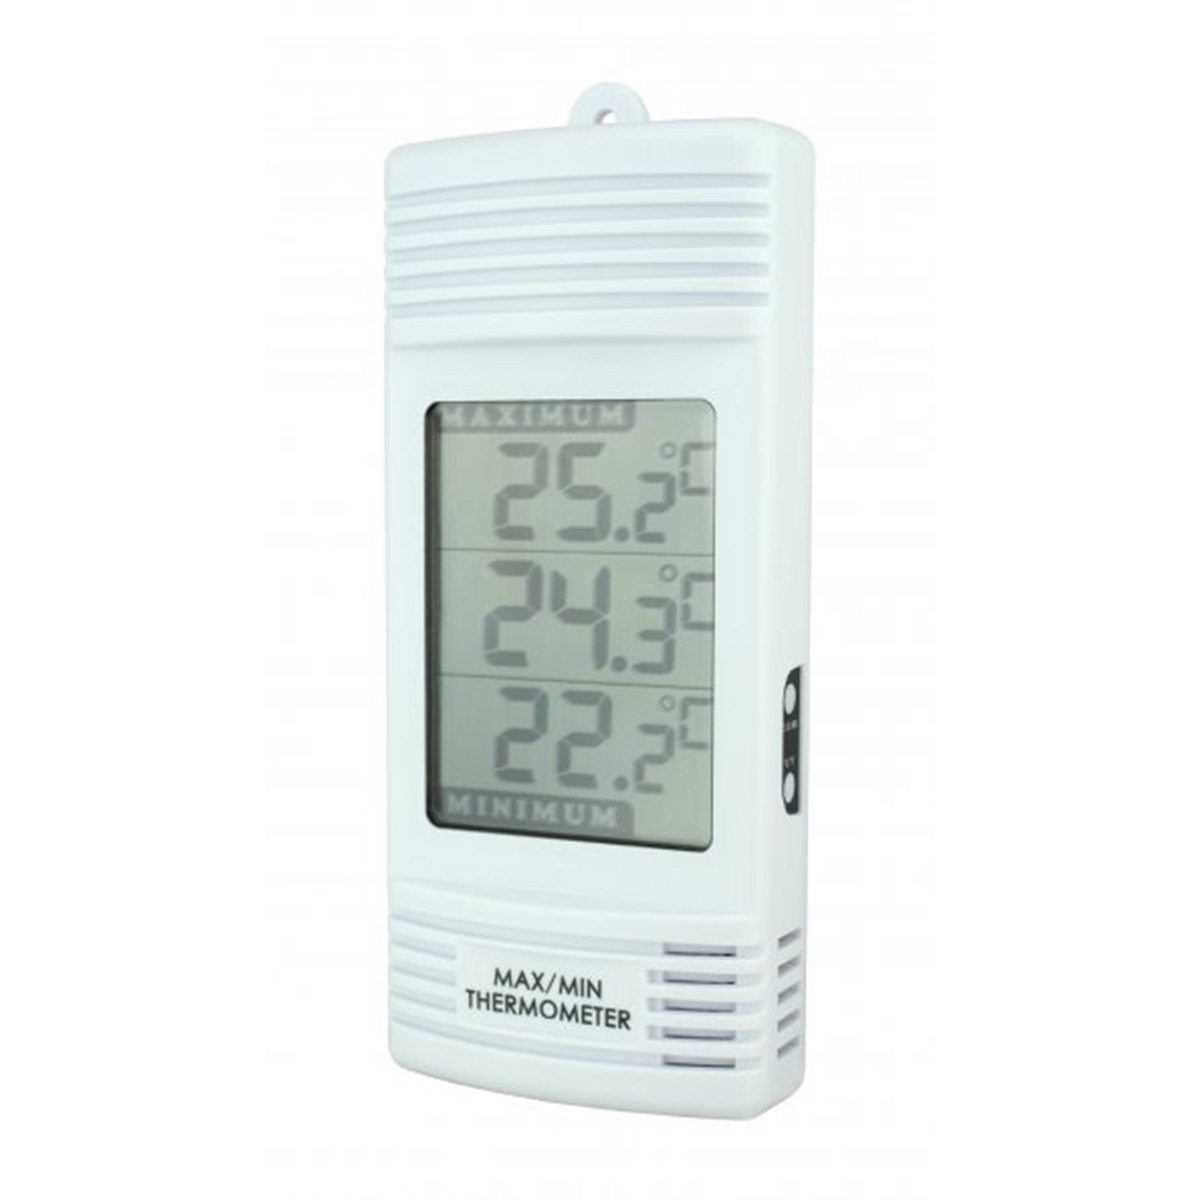 Best Max Min Thermometer for Wall Mounting - Thermometer World